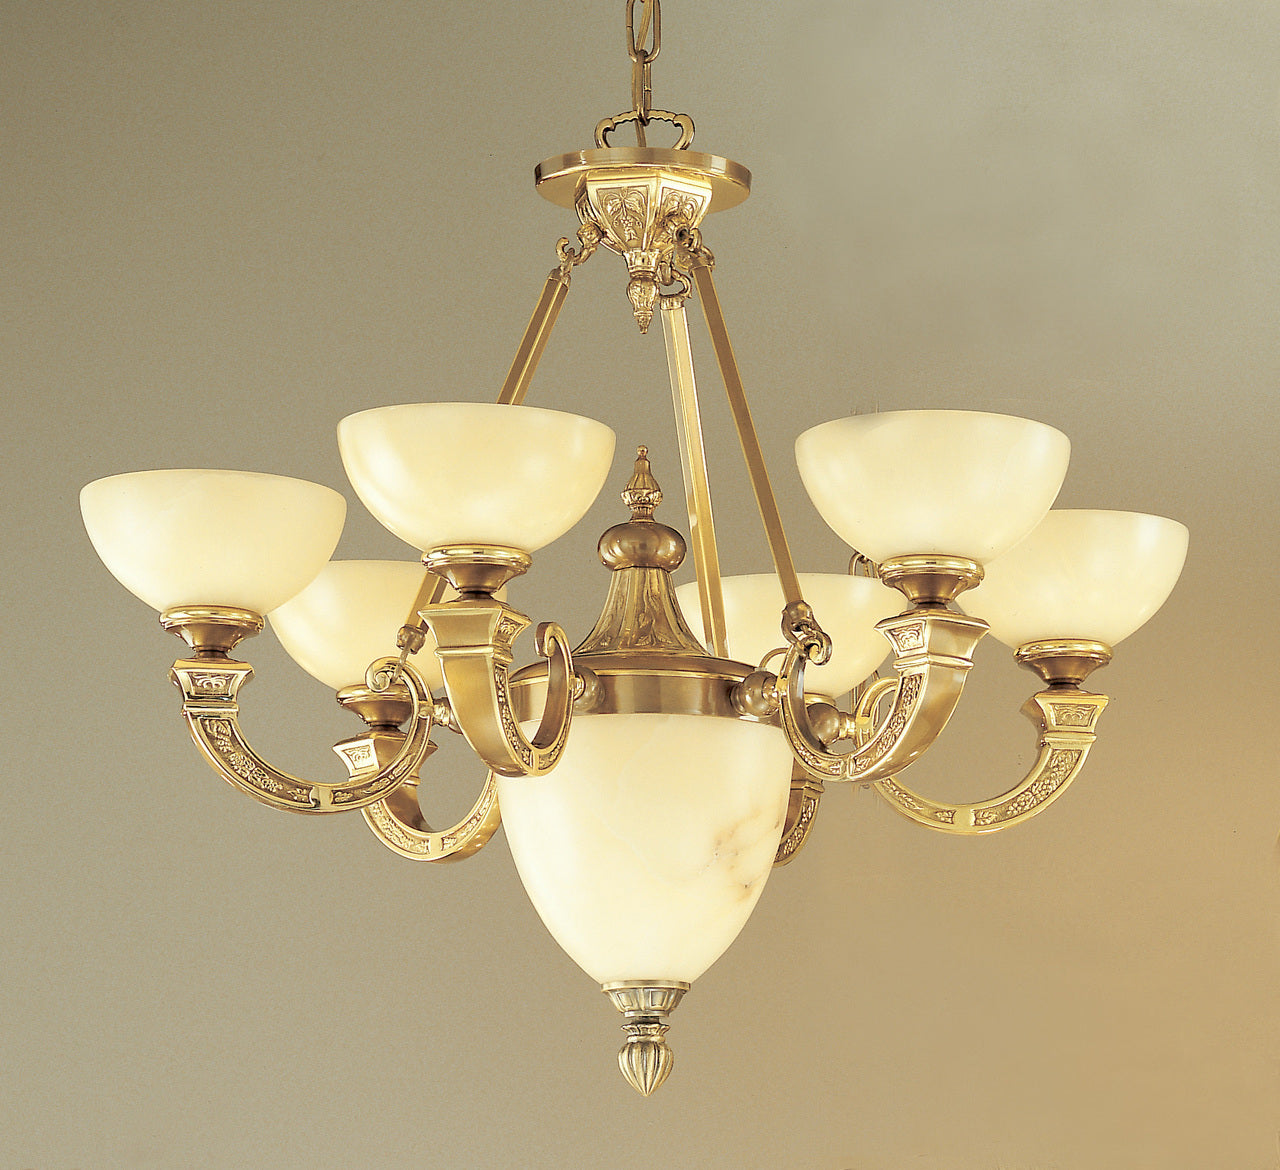 Classic Lighting 5625 ABZ Mallorca Alabaster Chandelier in Antique Bronze (Imported from Spain)